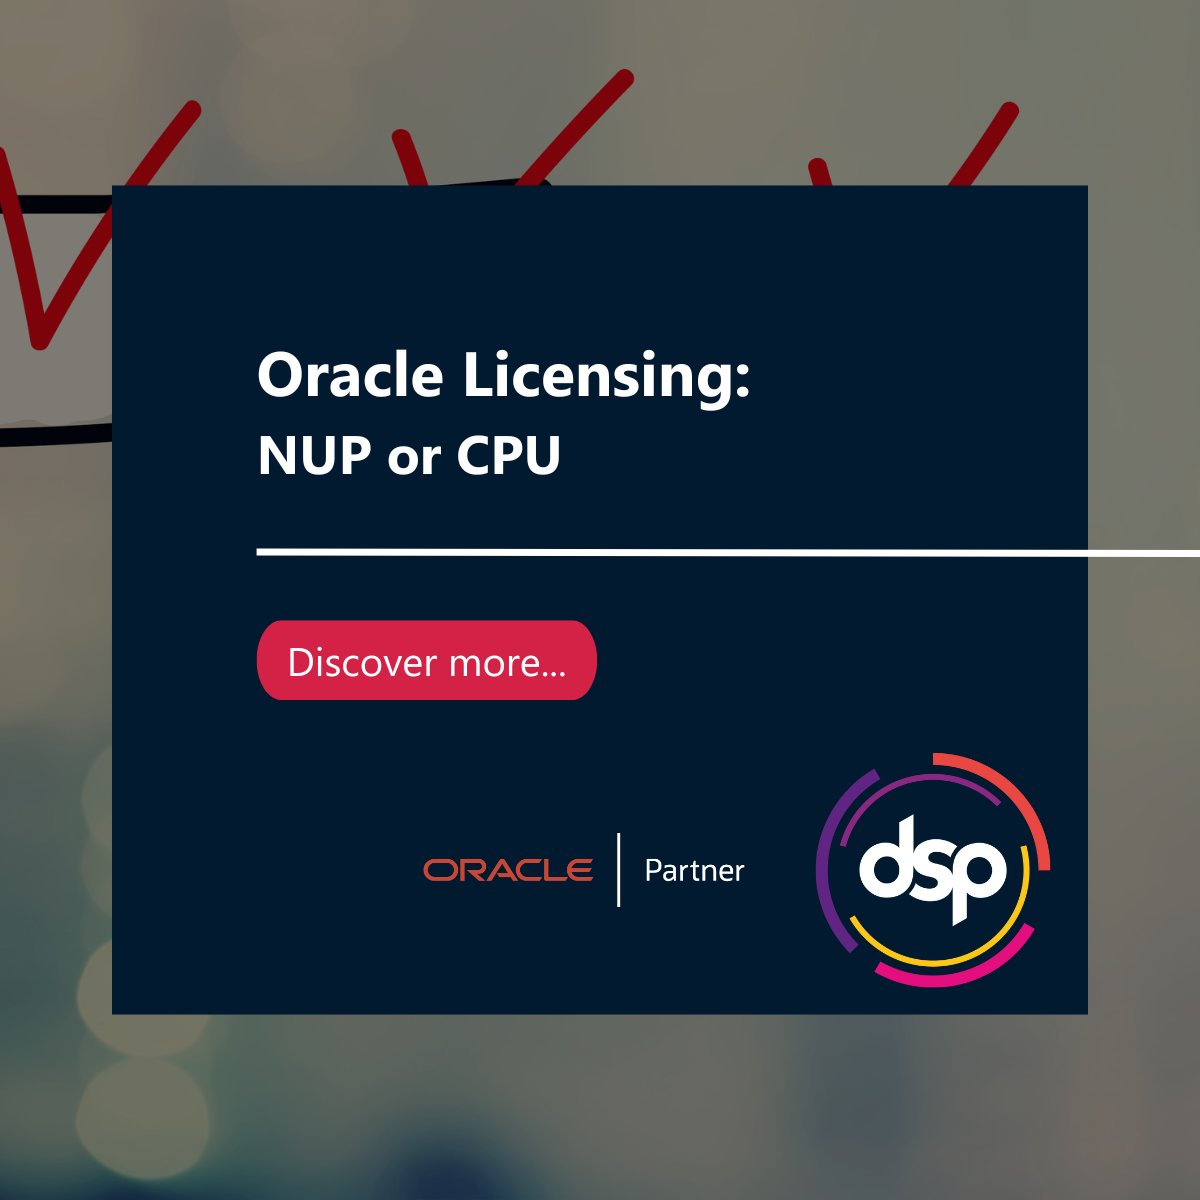 Oracle licensing can be complex, especially when it comes to choosing the right model. We have created a simple breakdown of the differences between NUP and CPU licensing and provided insights about which option might be best for you. Read now: bit.ly/499Wjyt #oracle